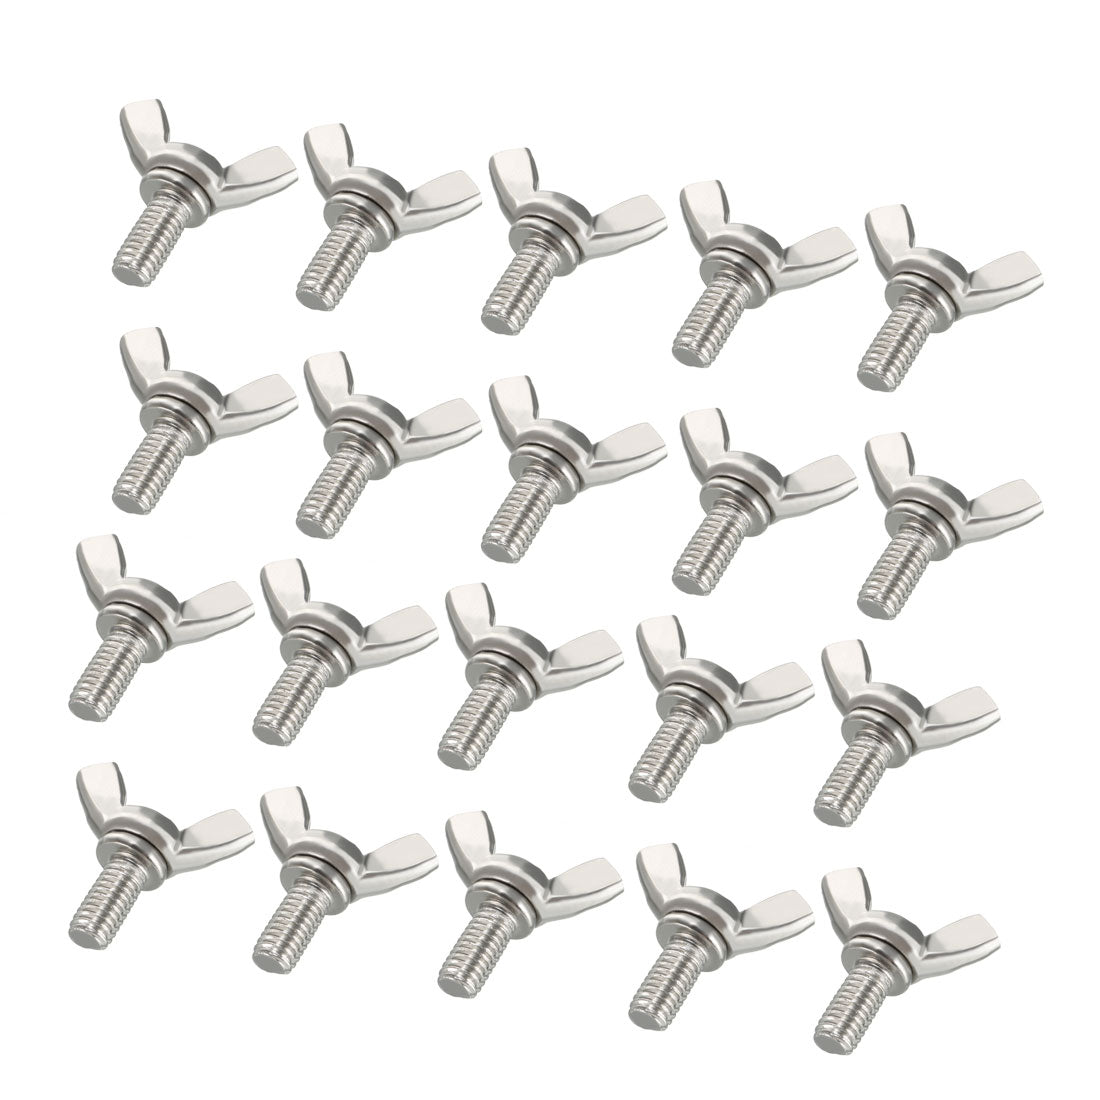 uxcell Uxcell Wingbolt Butterfly Wing Thumb Hand Screws Bolts M6x12mm 1mm Pitch Carbon Steel 20pcs